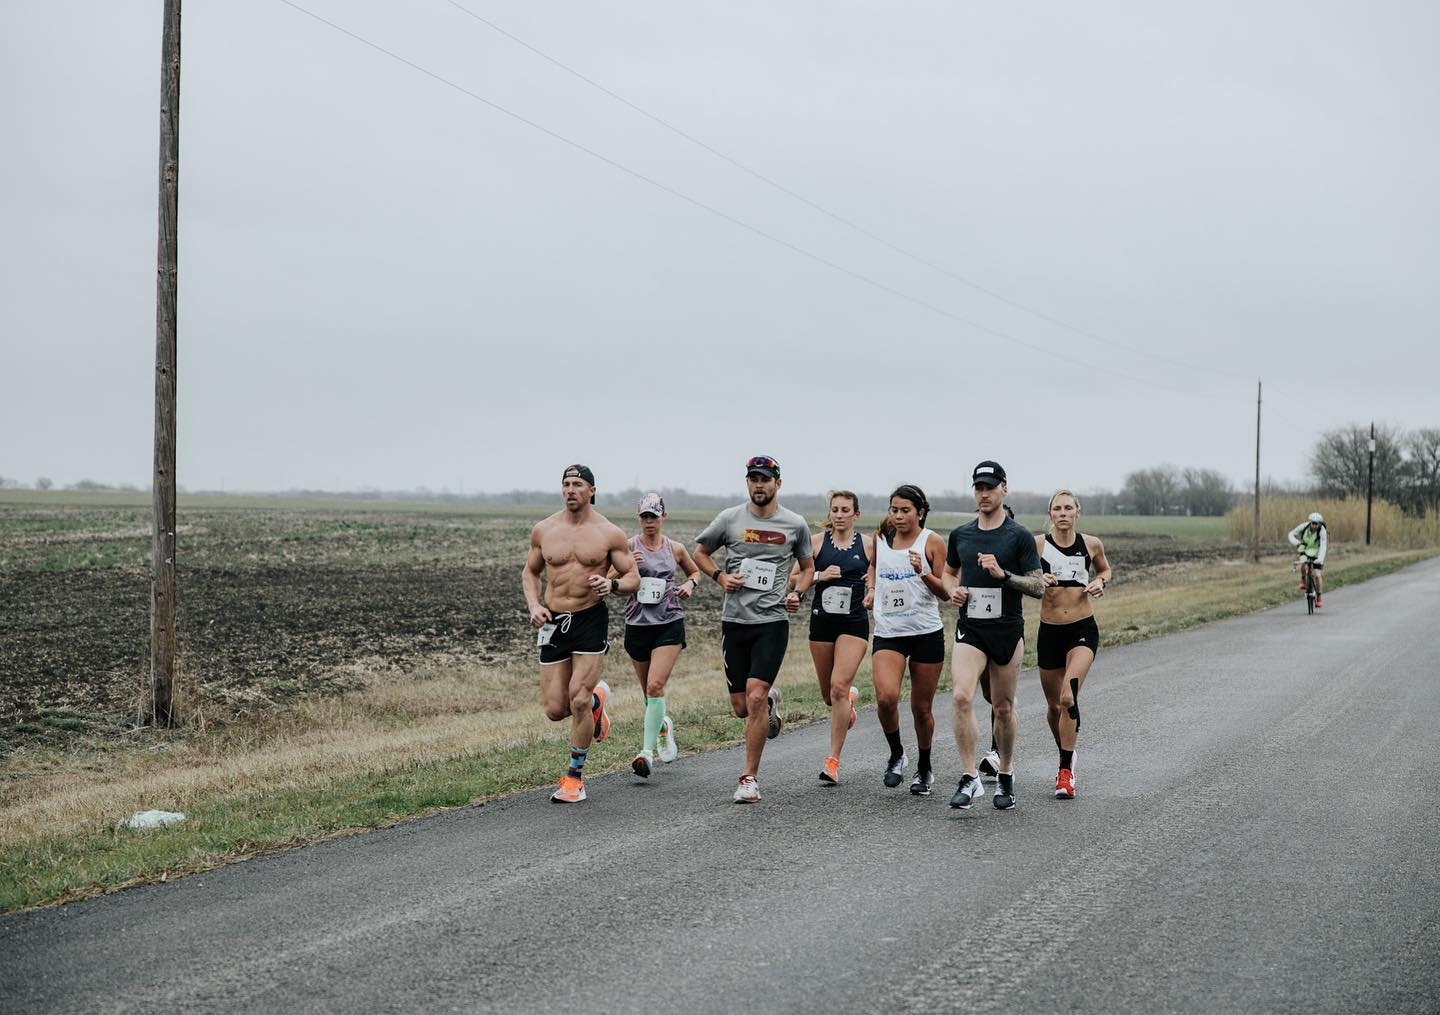 A group of runners during the Go One More Marathon. Nick Bare on the far left.